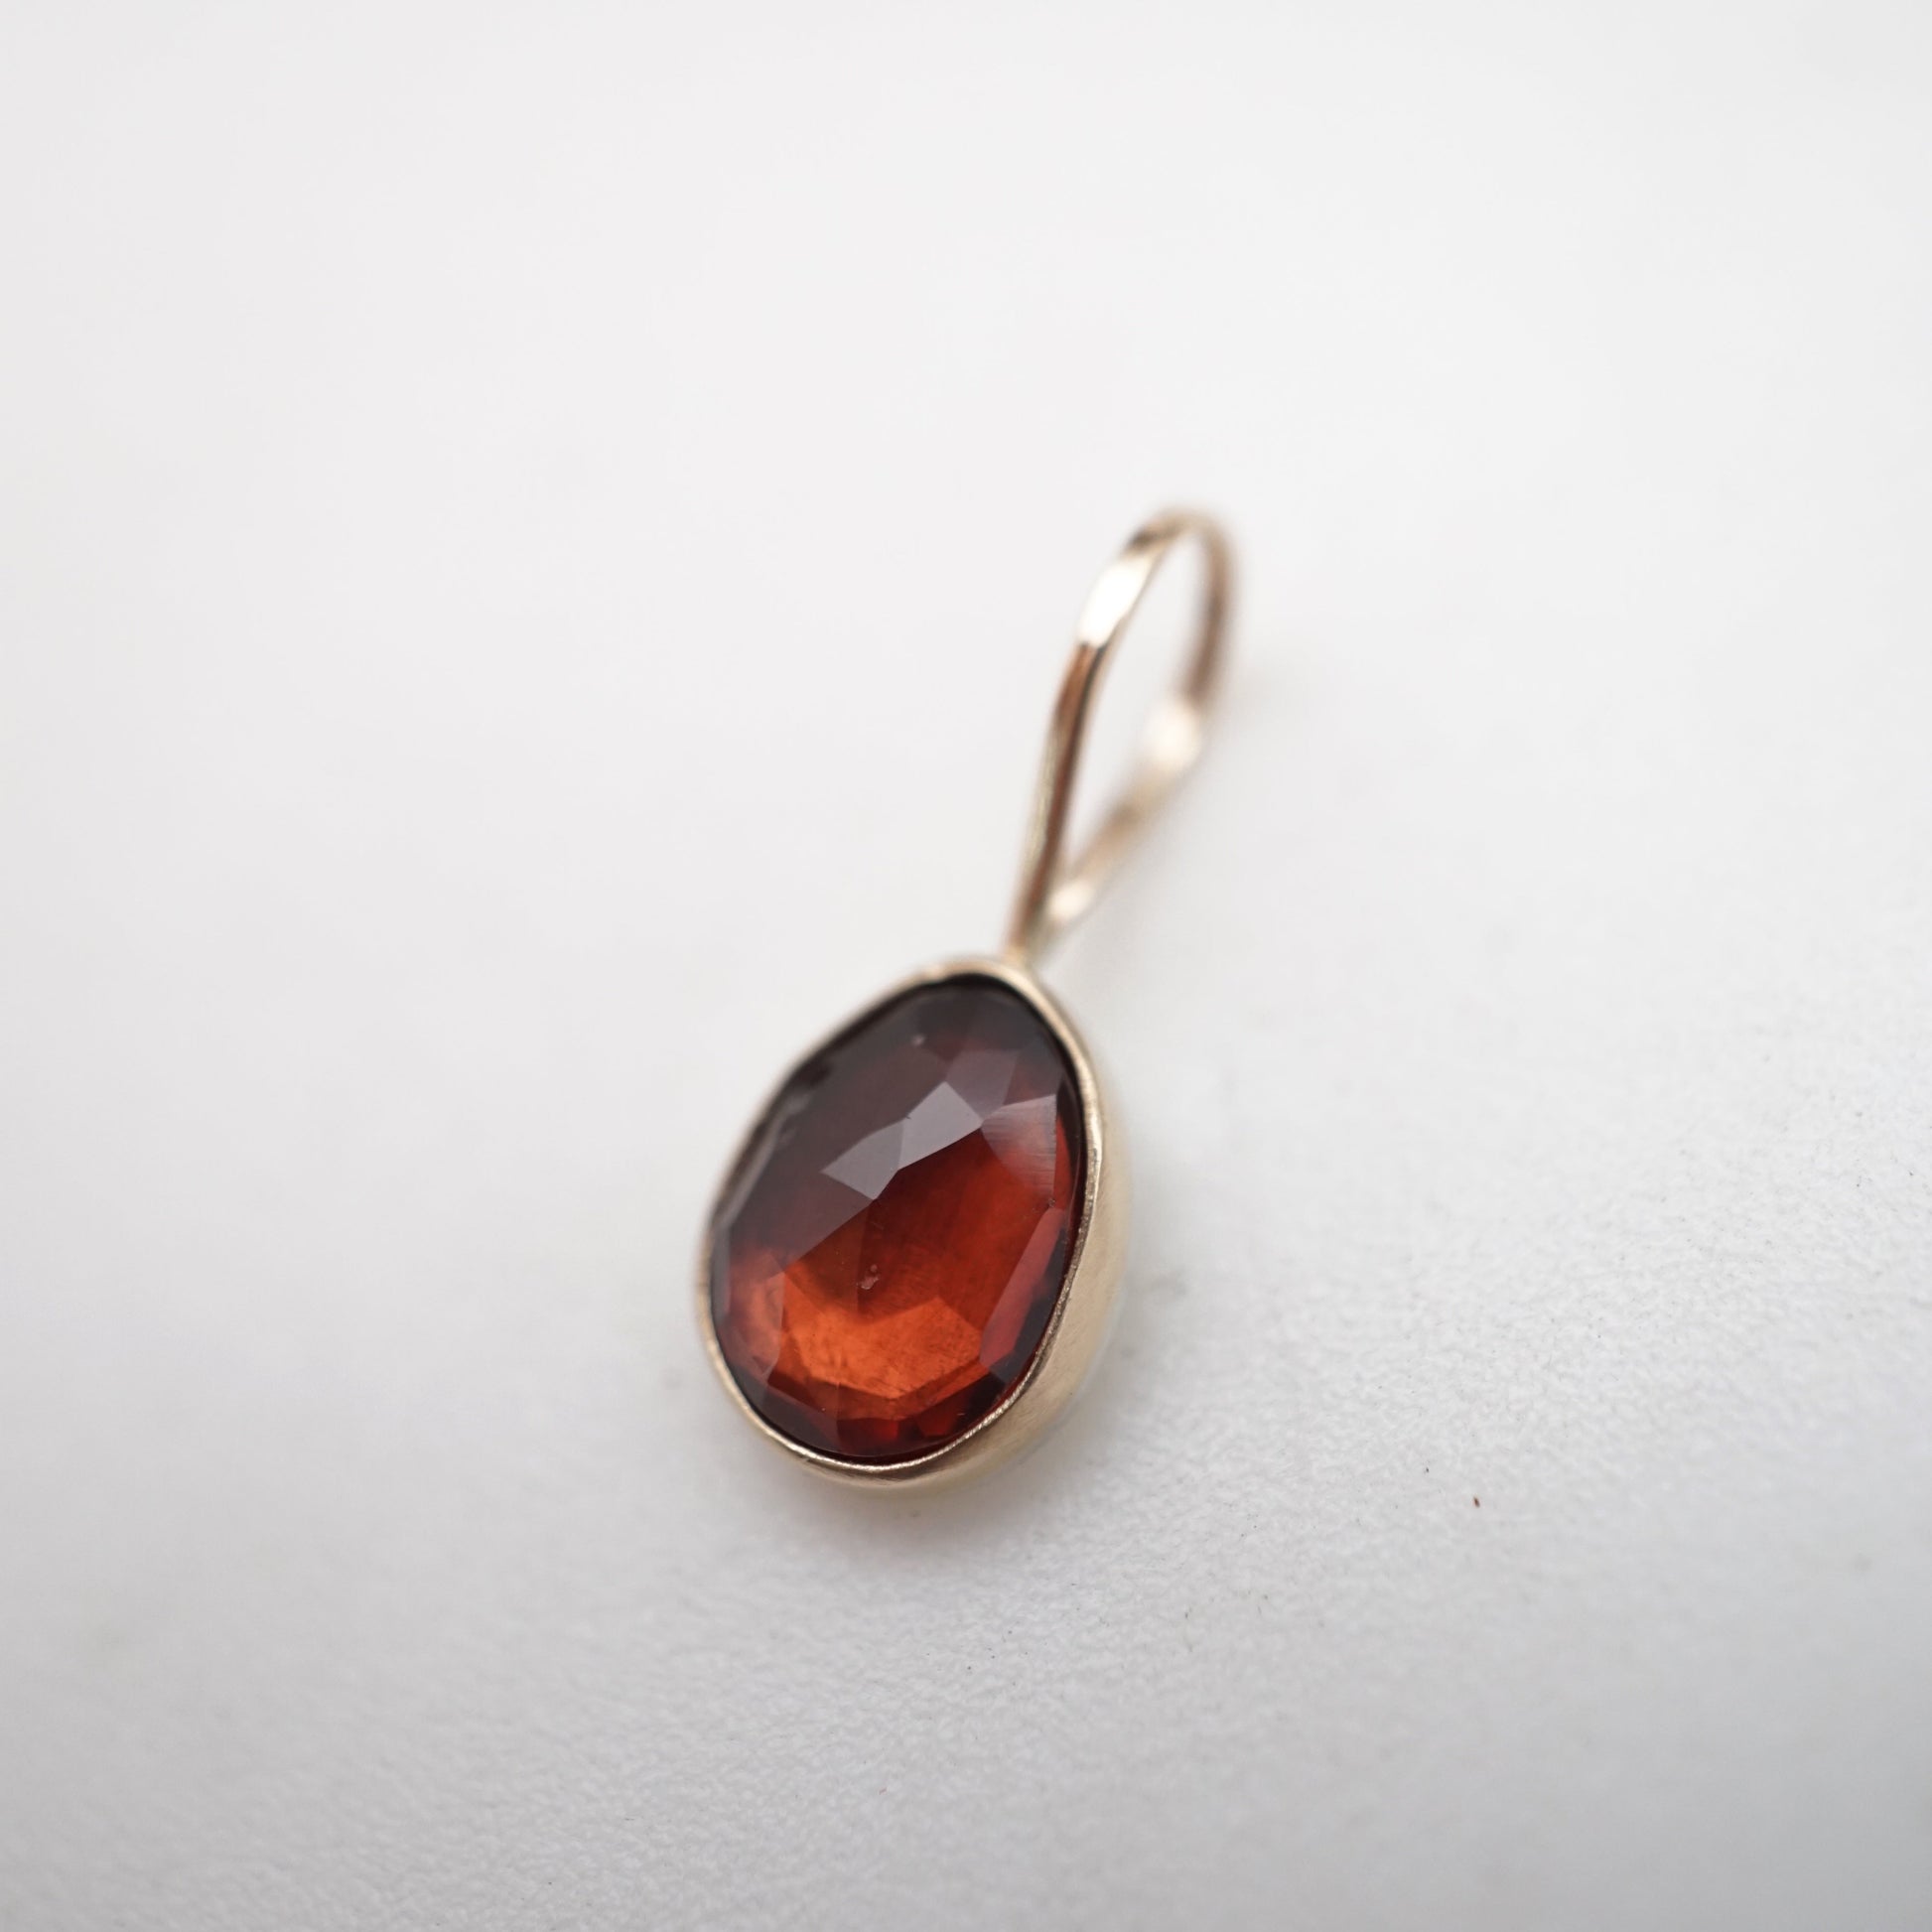 faceted garnet pendant in 14k gold + silver - NO CHAIN INCLUDED - Lumenrose